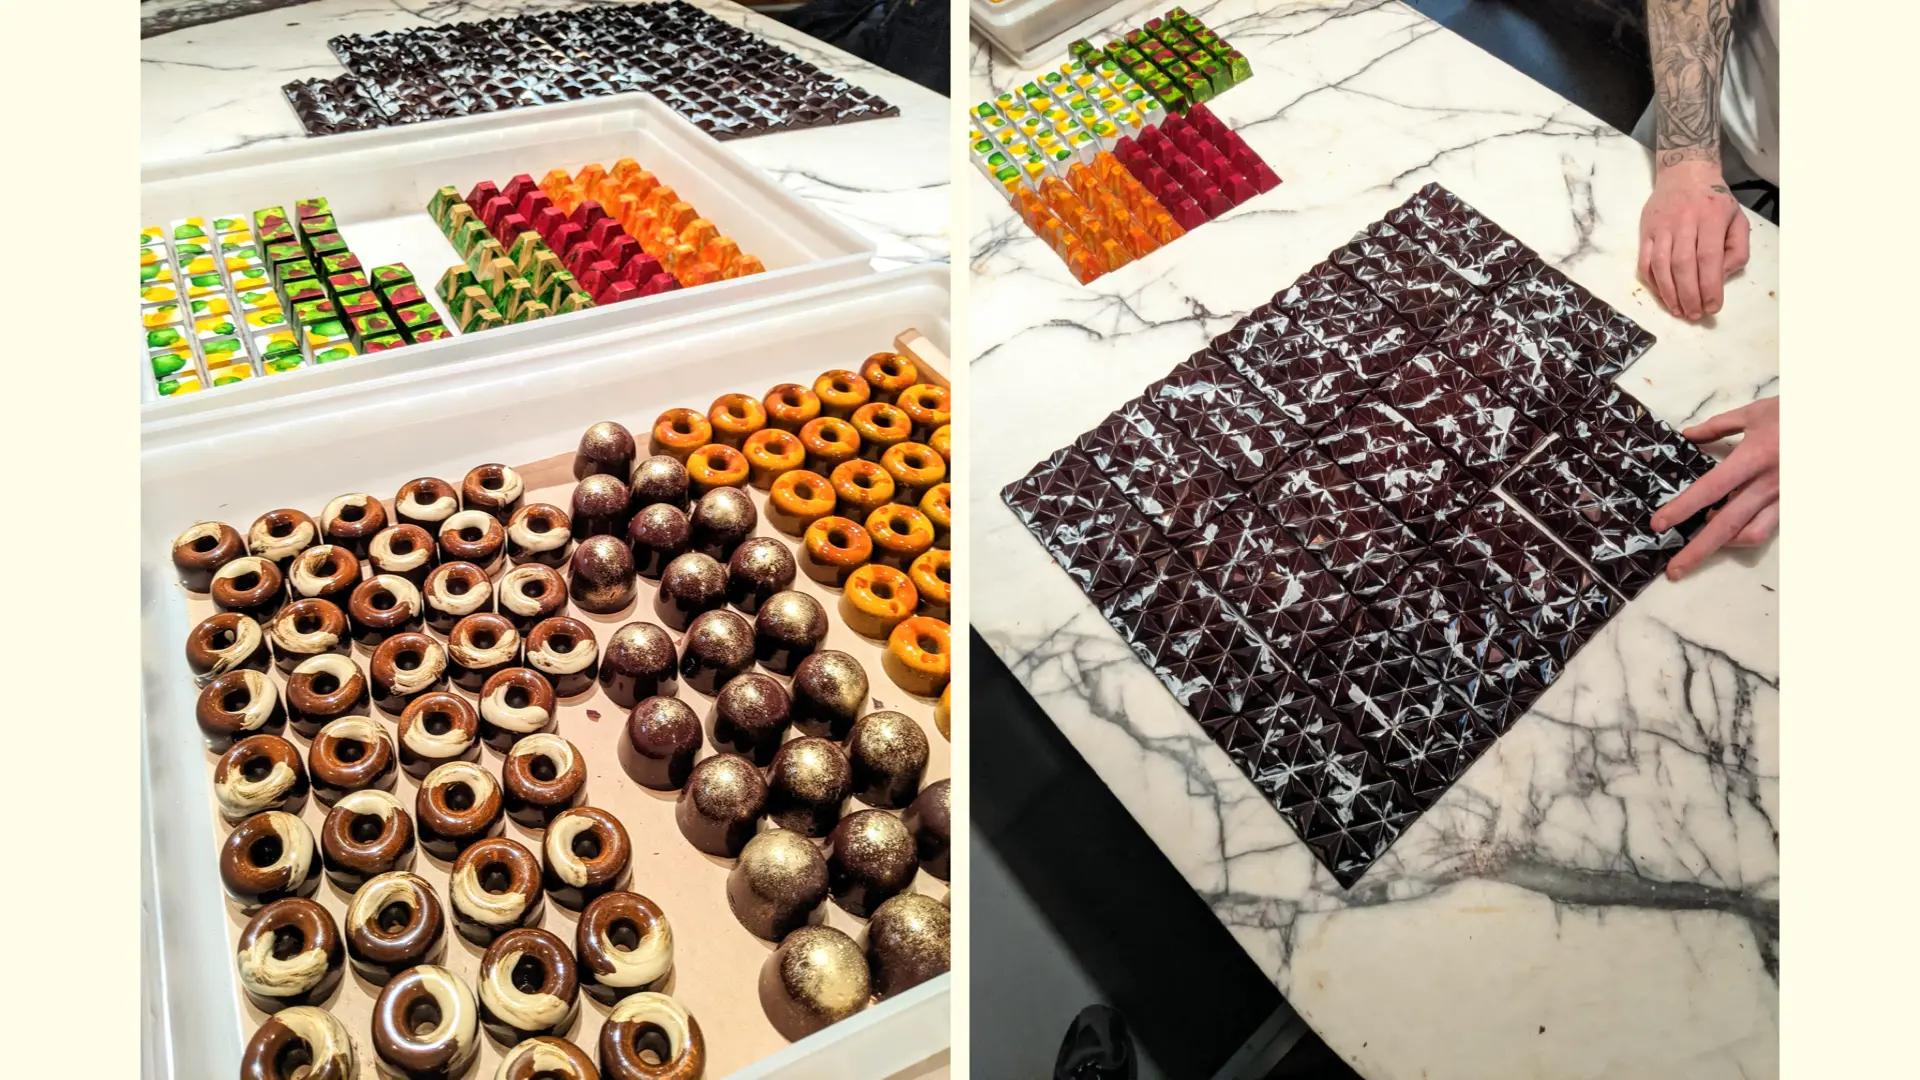 Two photographs: On the left, trays of chocolates on a marble counter and on the right, chocolate bars on a marble counter.